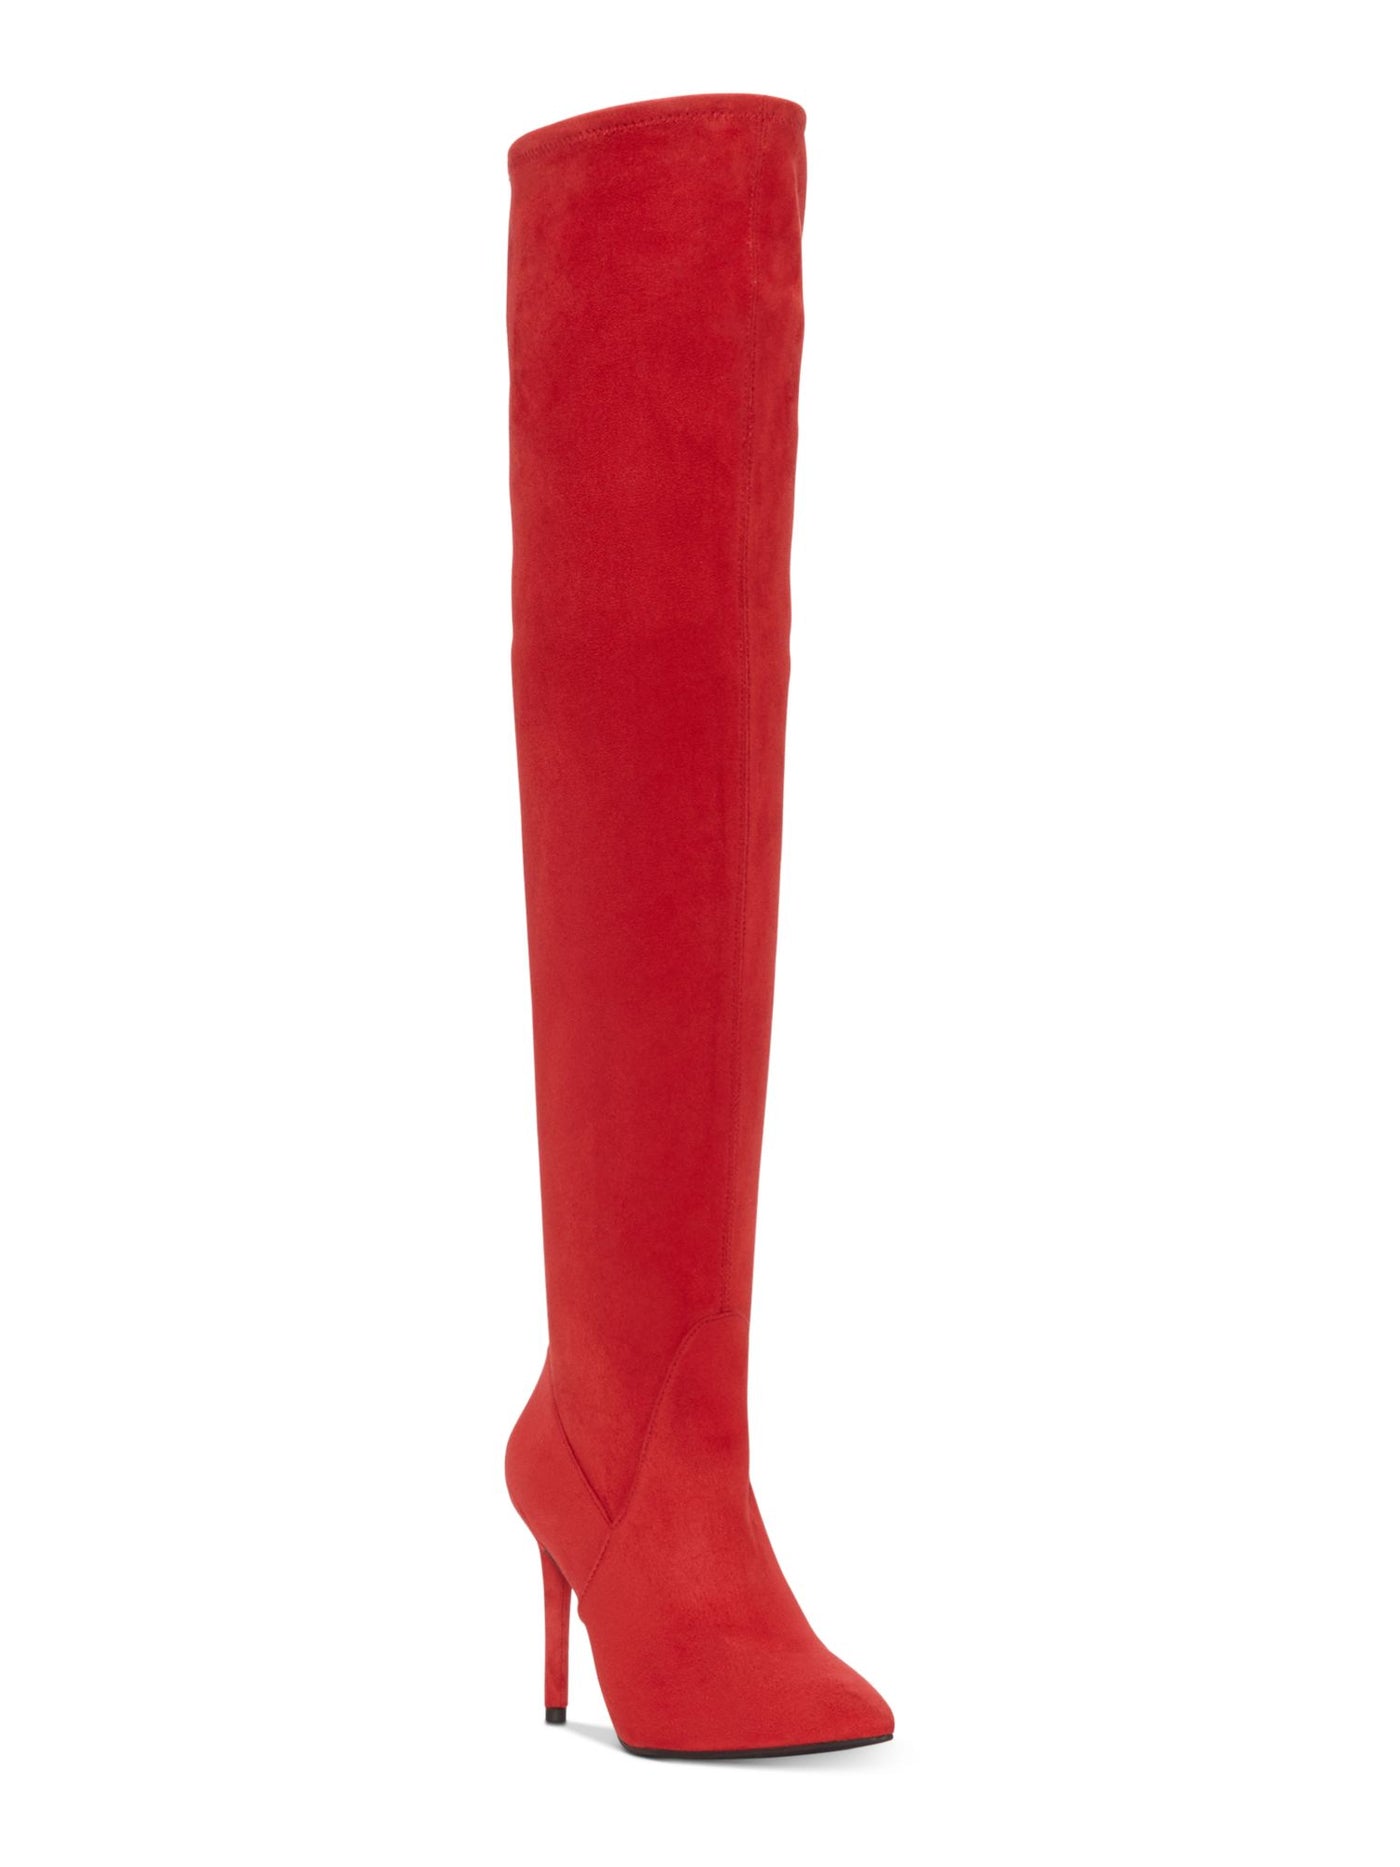 JESSICA SIMPSON Womens Red Stretch Cushioned Livelle Pointed Toe Stiletto Zip-Up Dress Boots 10 M